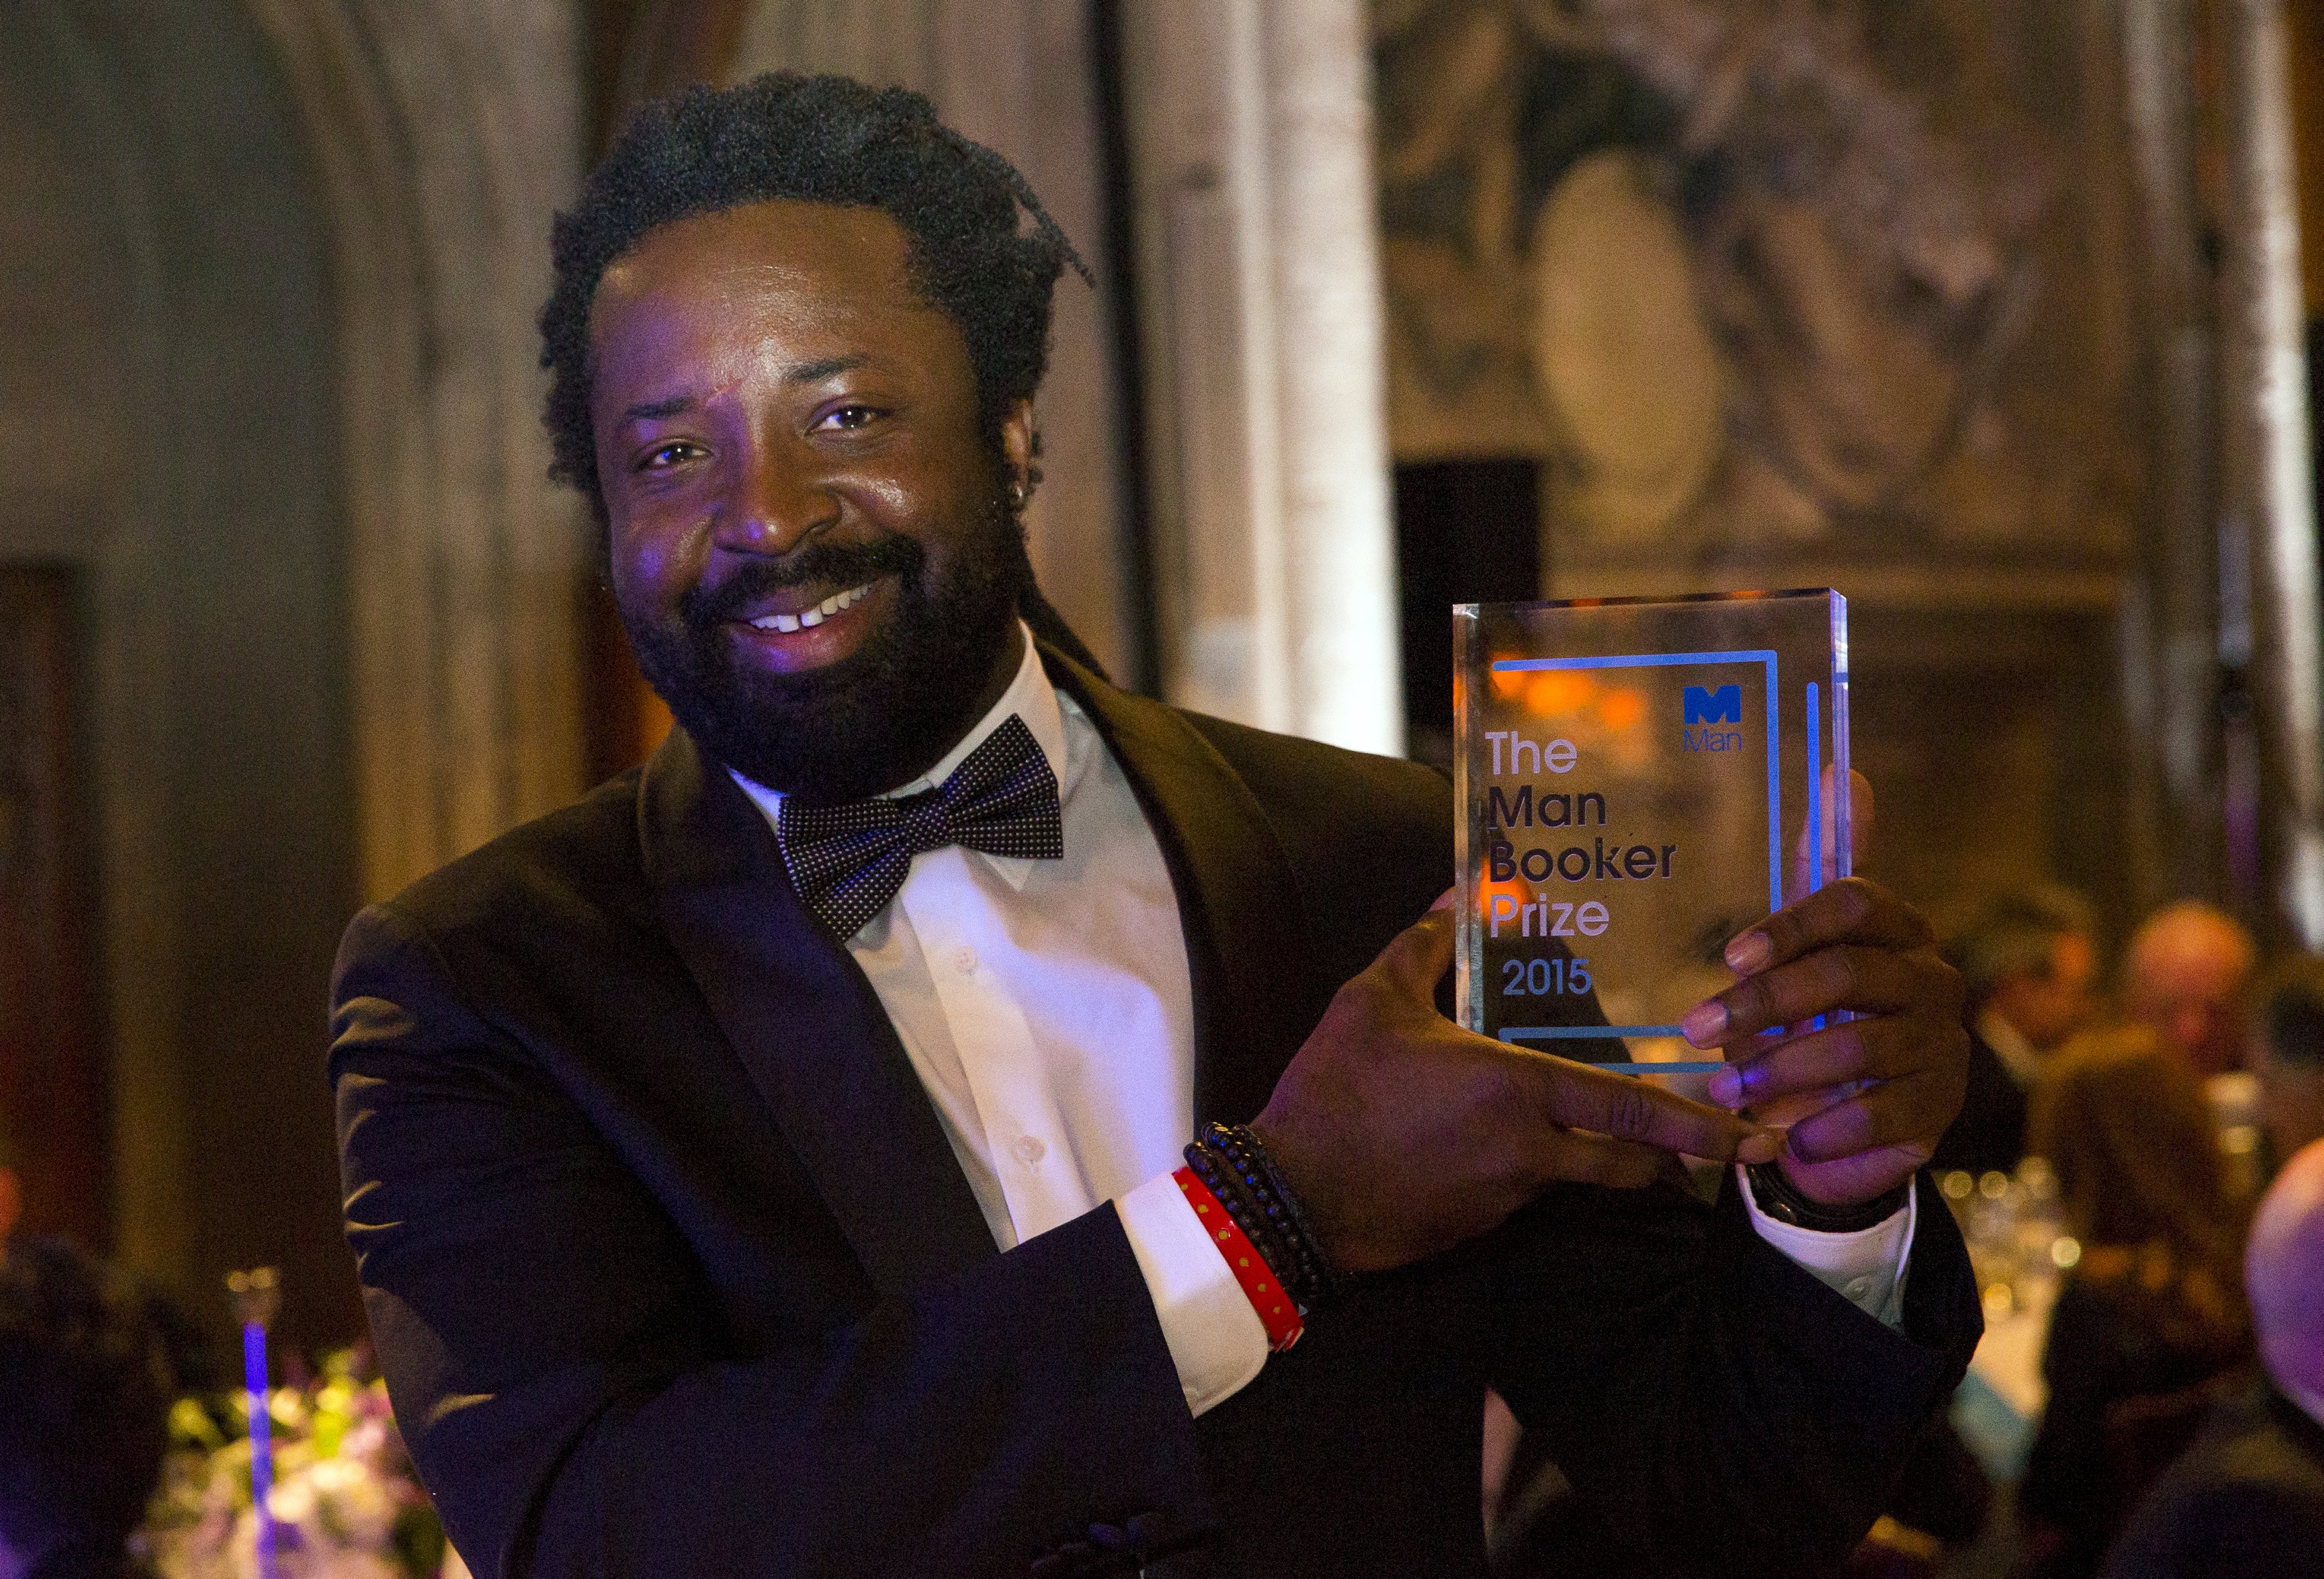 Marlon James poses with his prize at London's Guildhall. He destroyed the manuscript of his first novel and briefly stopped writing after scores of rejections from publishers. Photo: Reuters